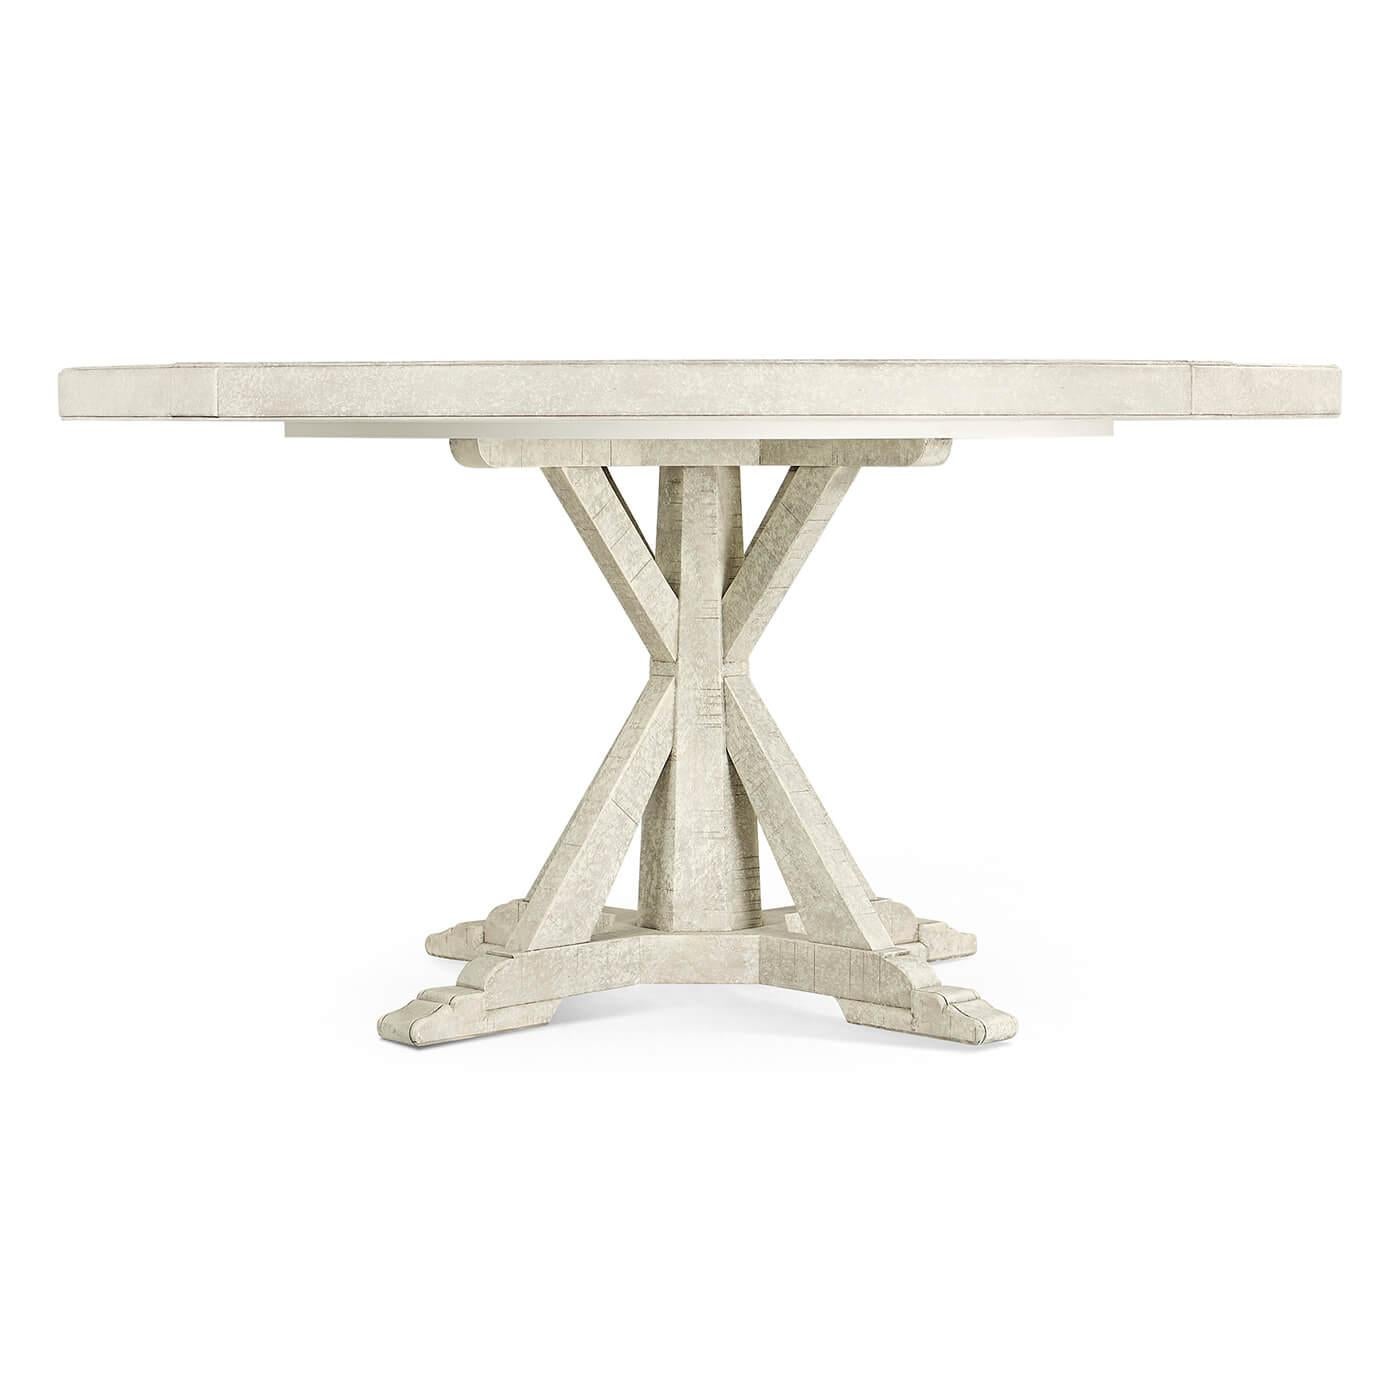 A round dining table finished in our whitewash color with a rustic finish showing exposed saw marks and set on a bracketed country kitchen base, the table also has a built-in self-storing Lazy Susan.

Dimensions: 60